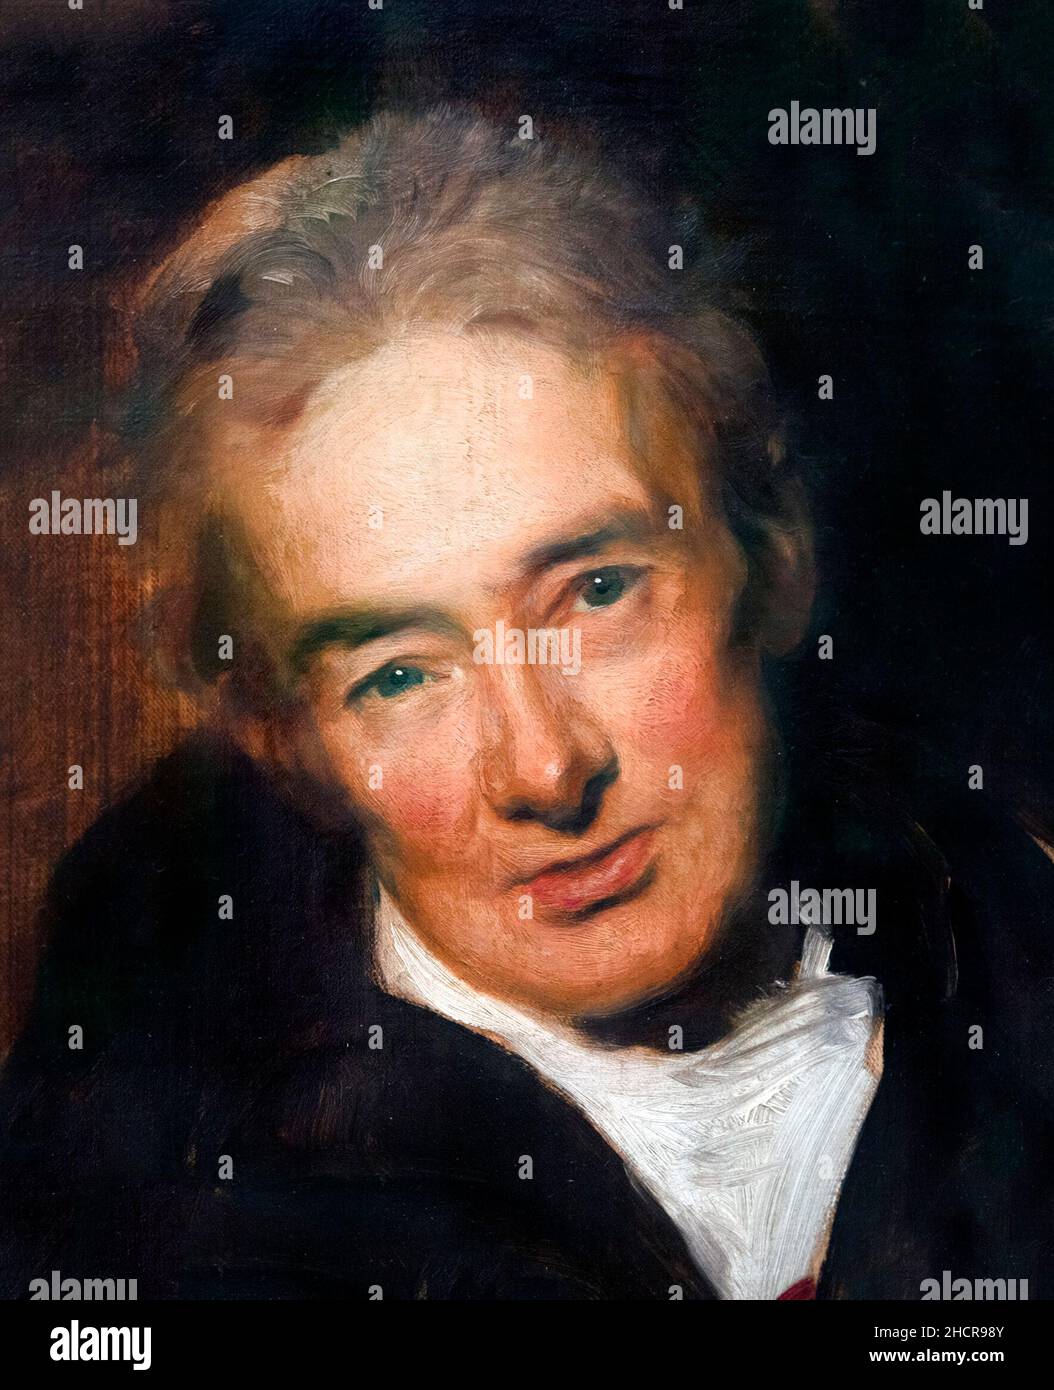 William Wilberforce (1759–1833), an English politician, philanthropist, and a leader of the movement to abolish the slave trade. Detail from an unfinished portrait by Sir Thomas Lawrence, oil on canvas, 1828. Stock Photo